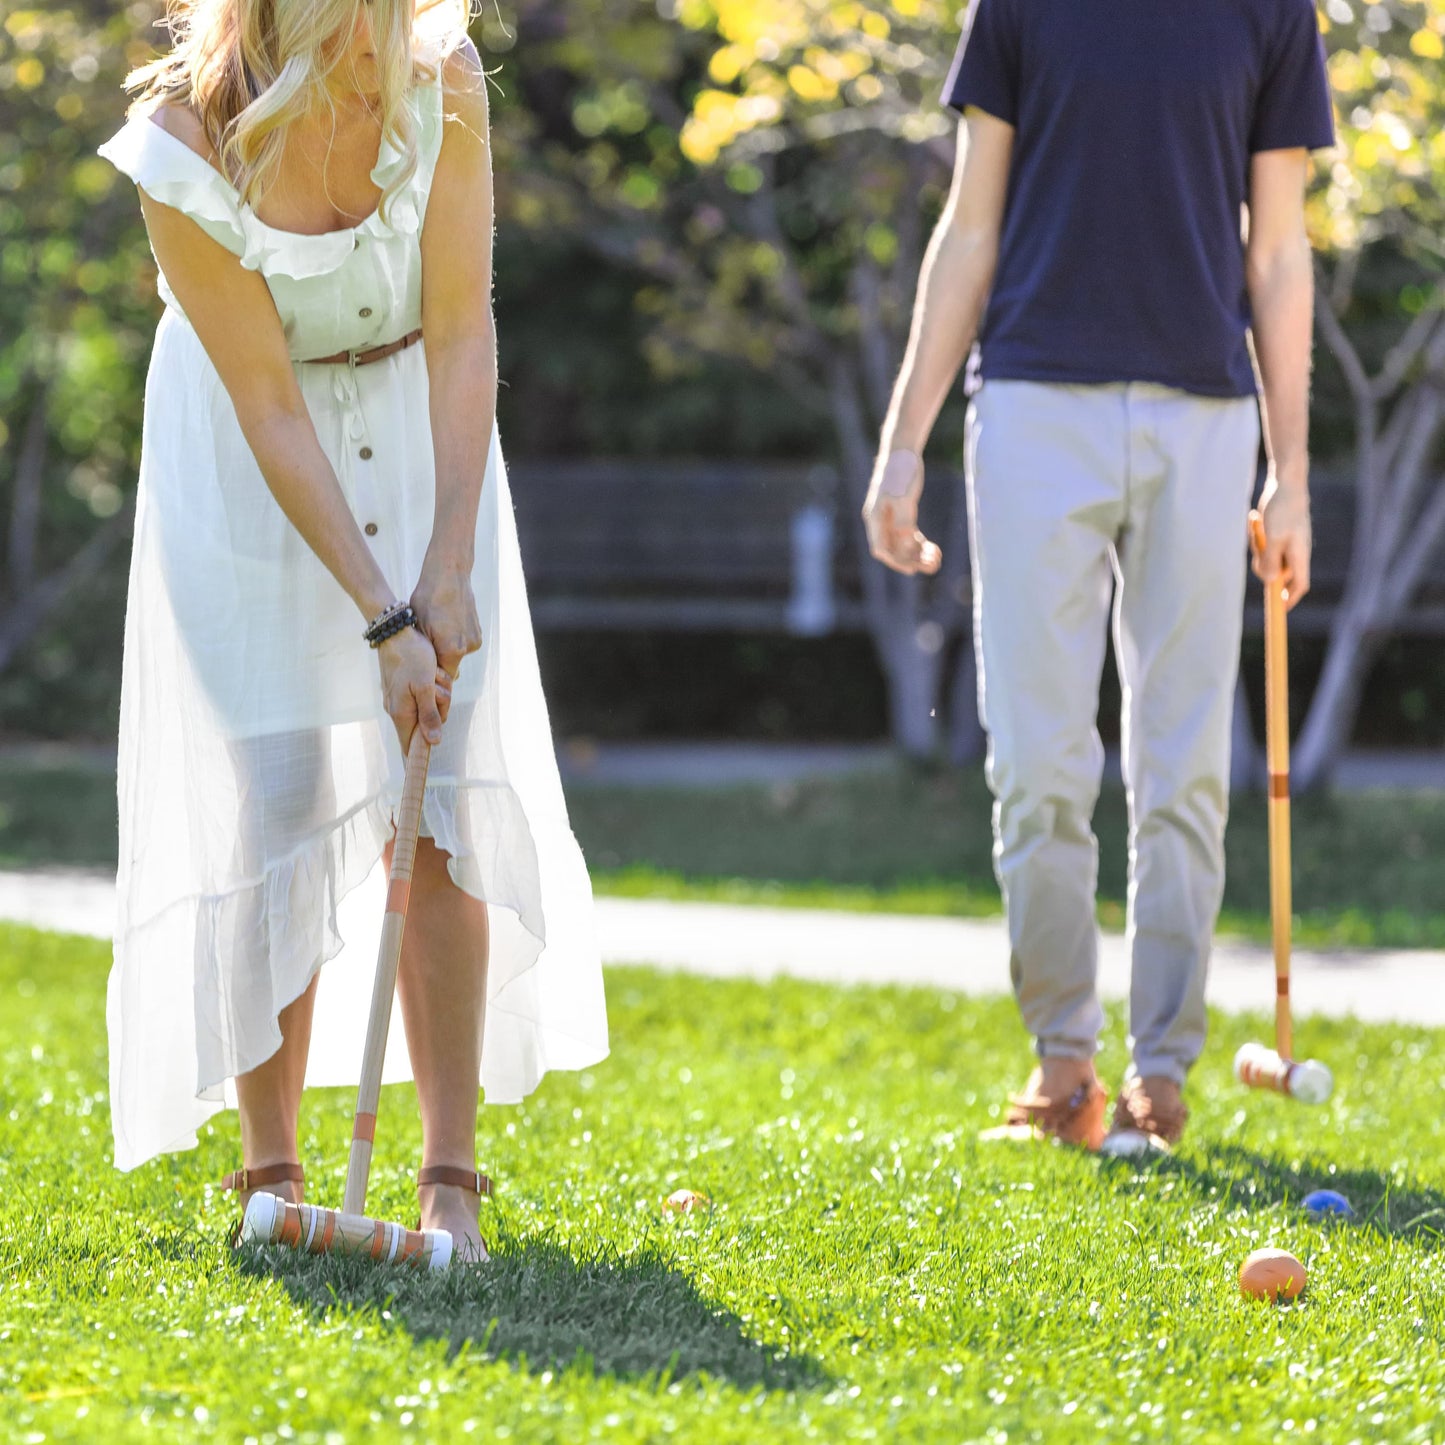 Sportcraft Croquet Set Lifestyle Image, Family playing together in a park